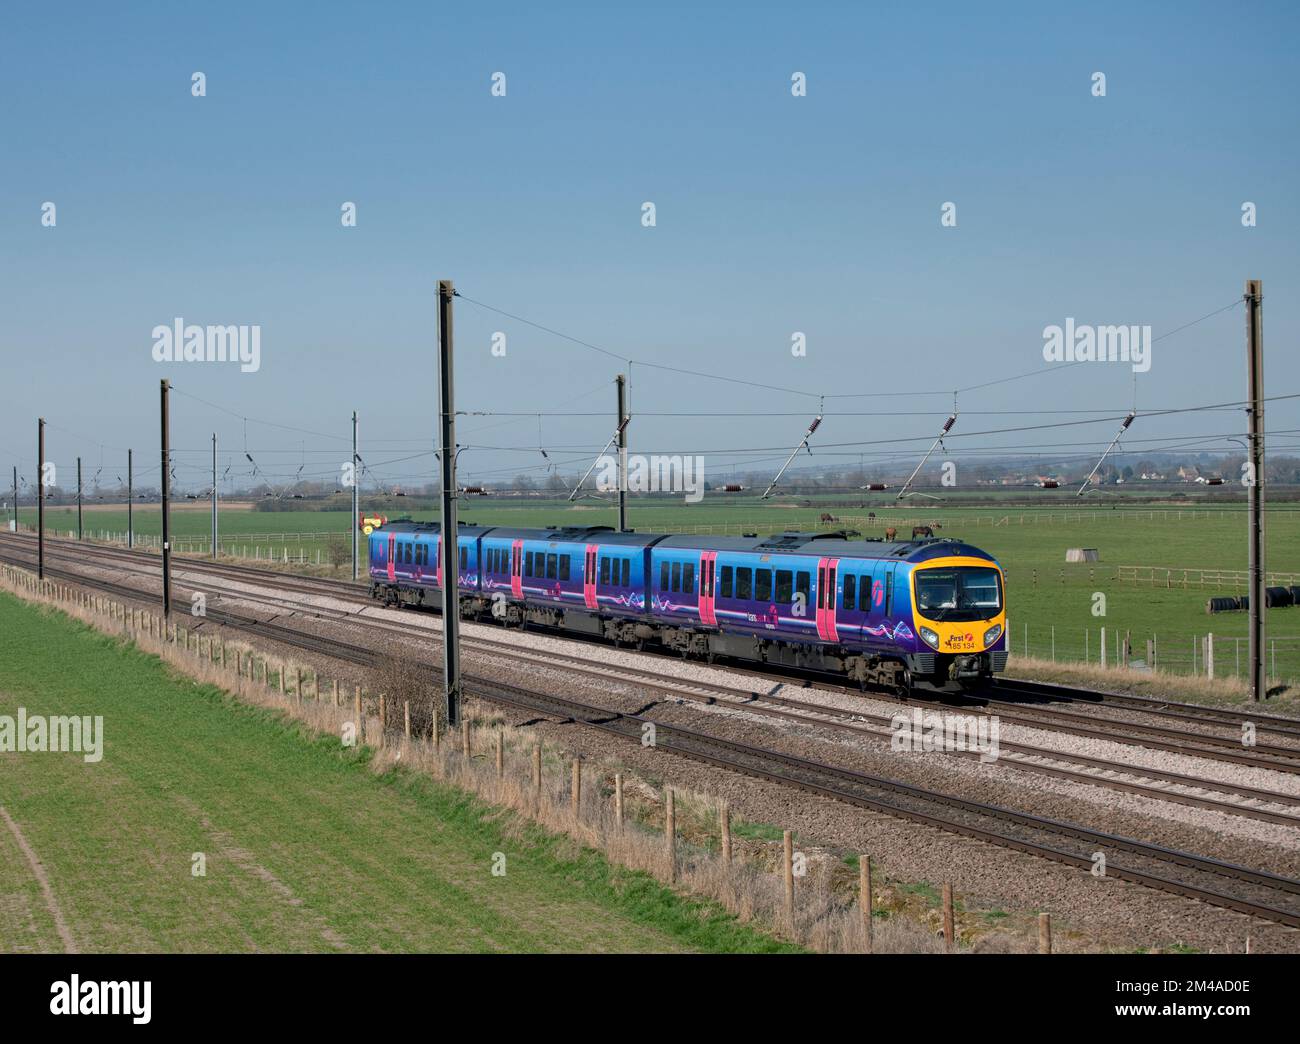 First Transpennine Express class 185 diesel train 185134 on the 4 track electrified east coast mainline at Newsham Stock Photo